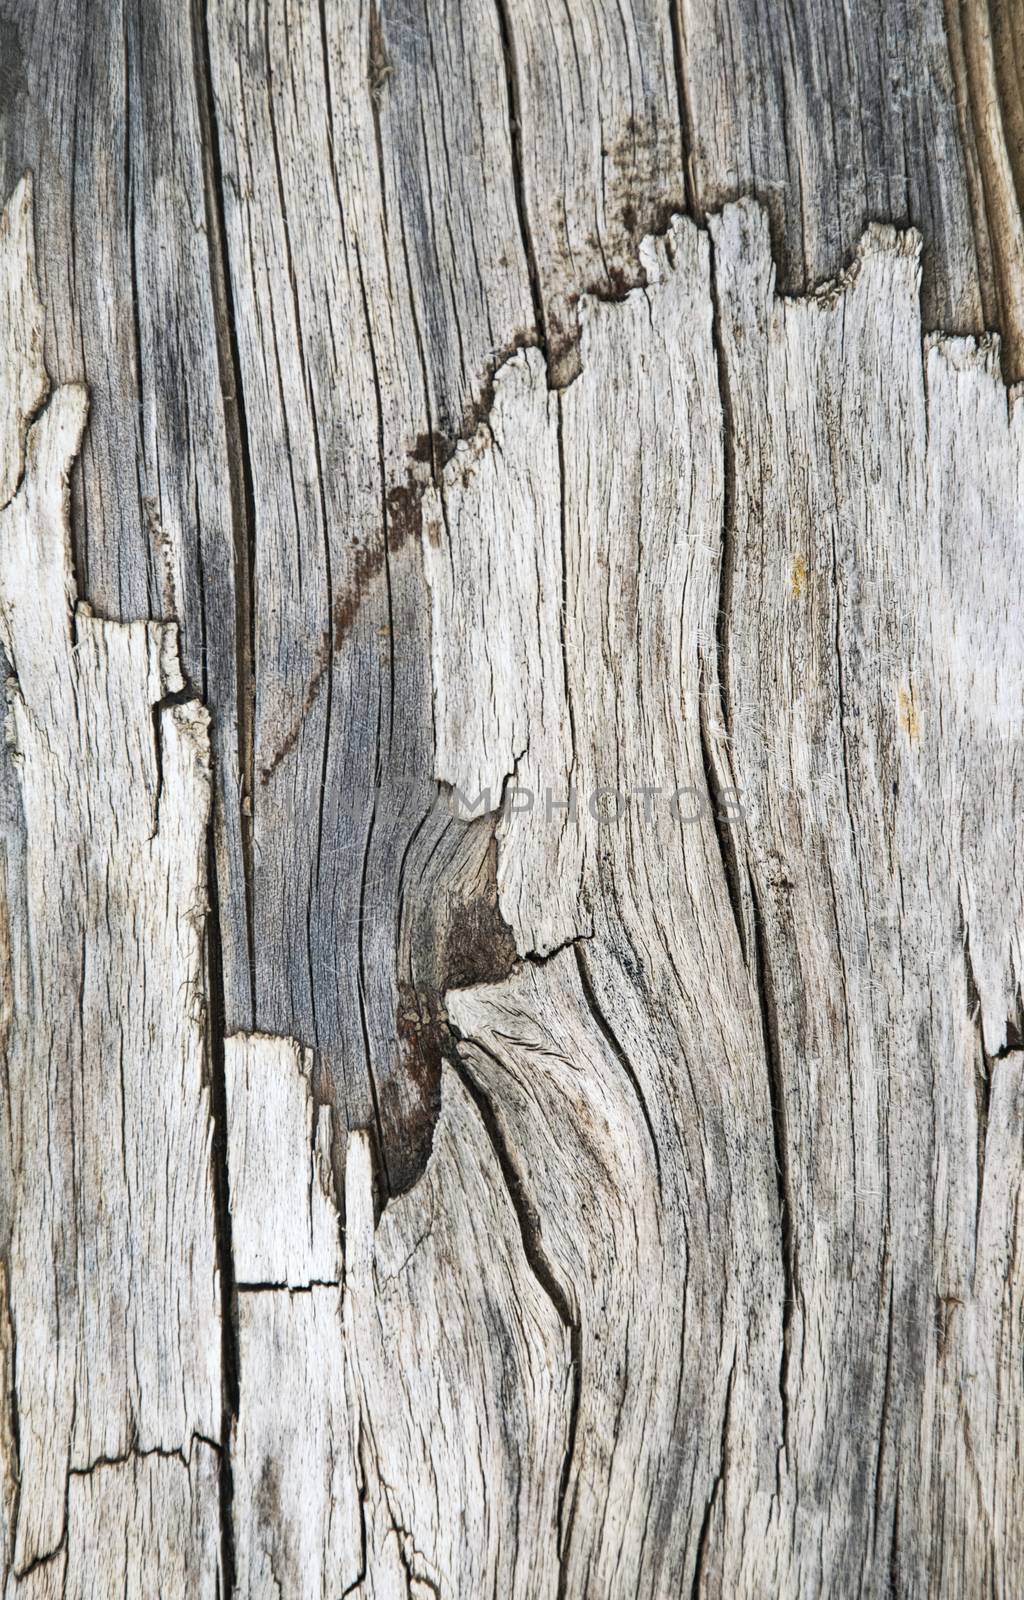 background or texture detail of cracked old wood